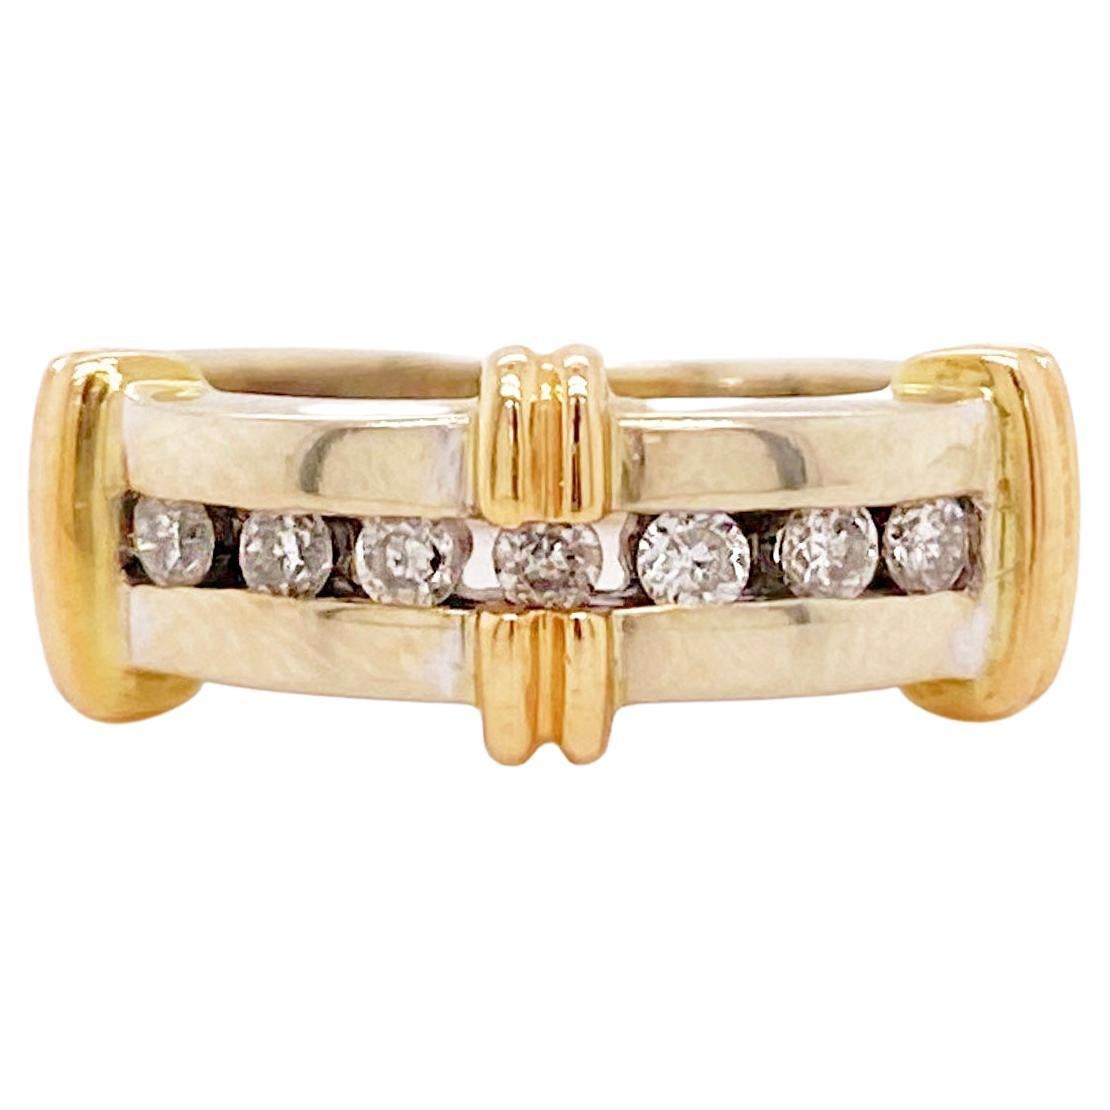 For Sale:  Channel Diamond Band, 14K Mixed Metal Ring w 7 Diamonds, Wide Band